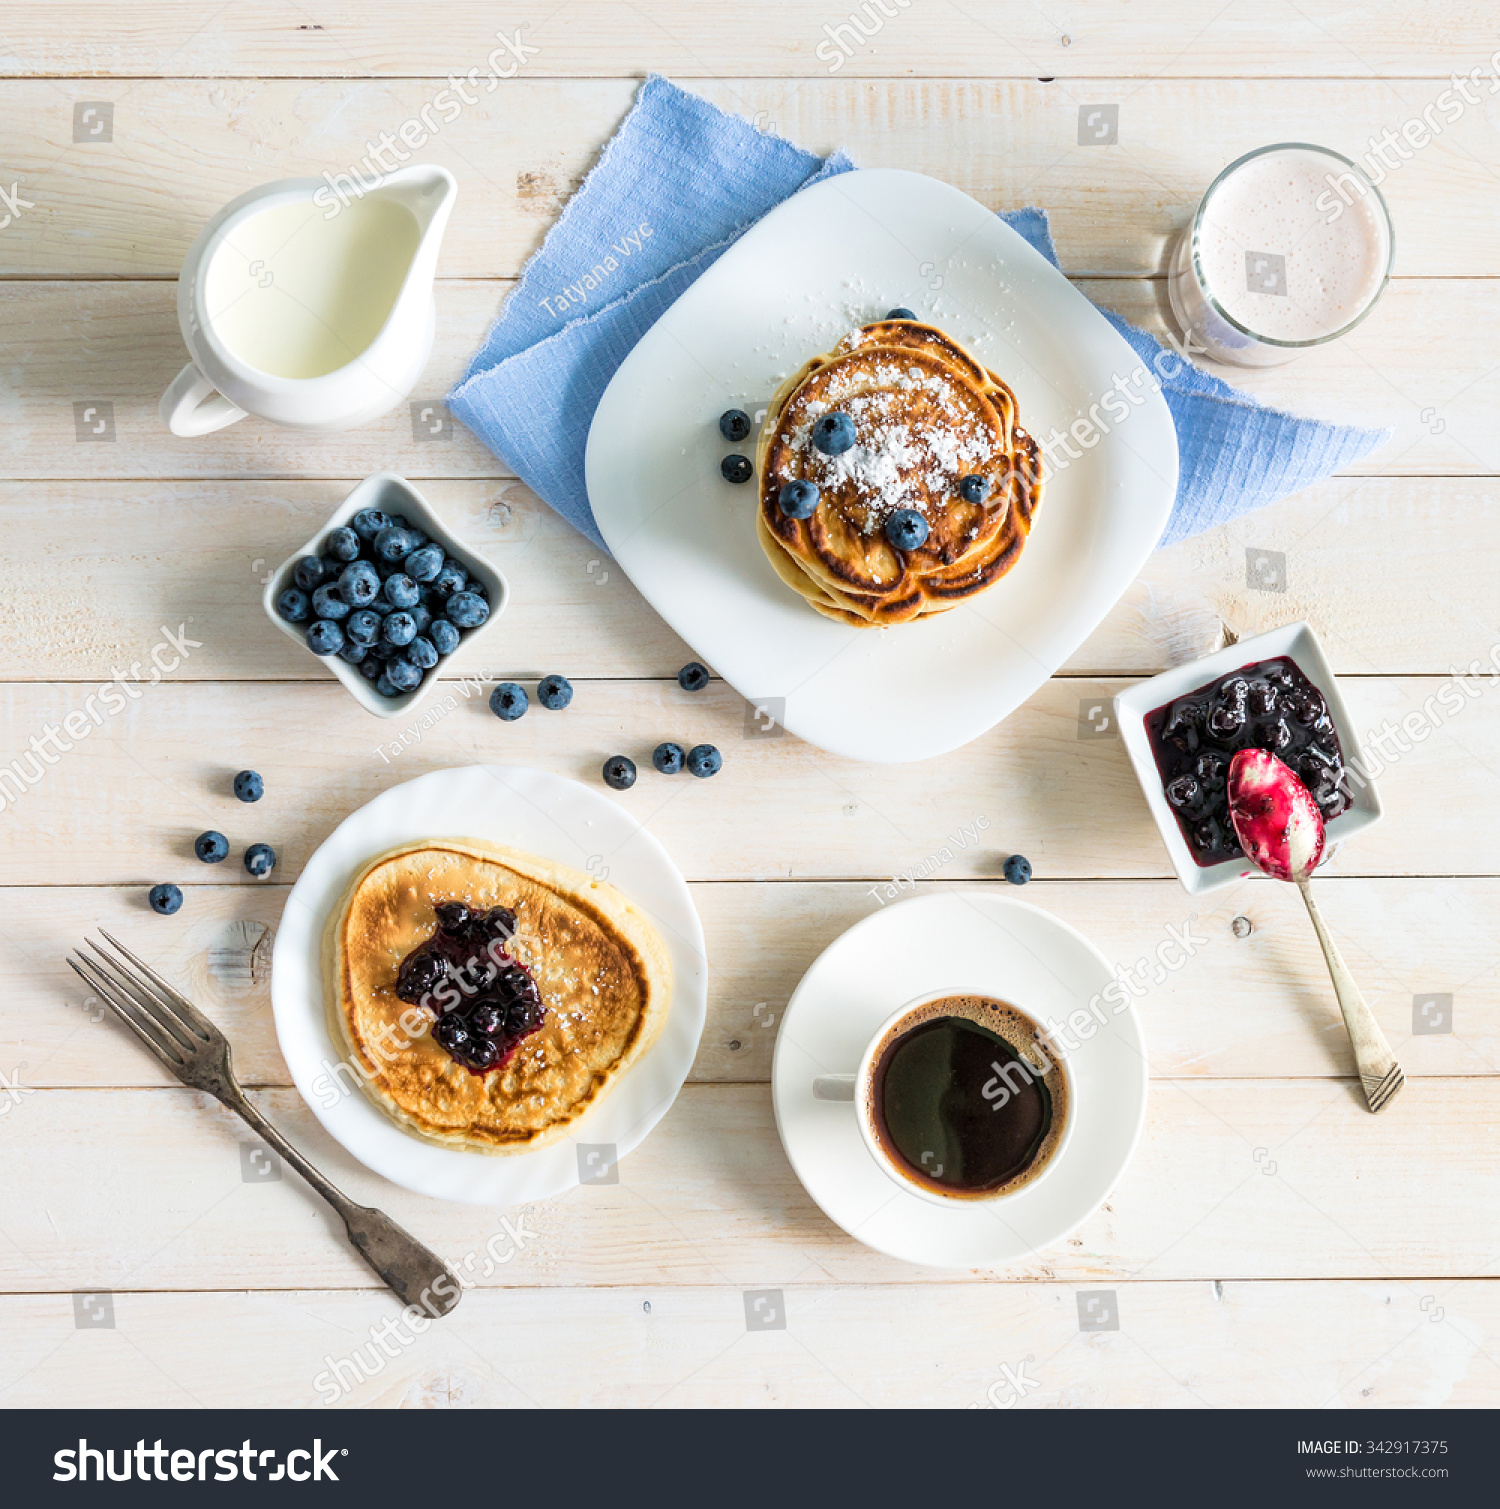 pancakes with blueberry and coffee on wooden background. top view #342917375